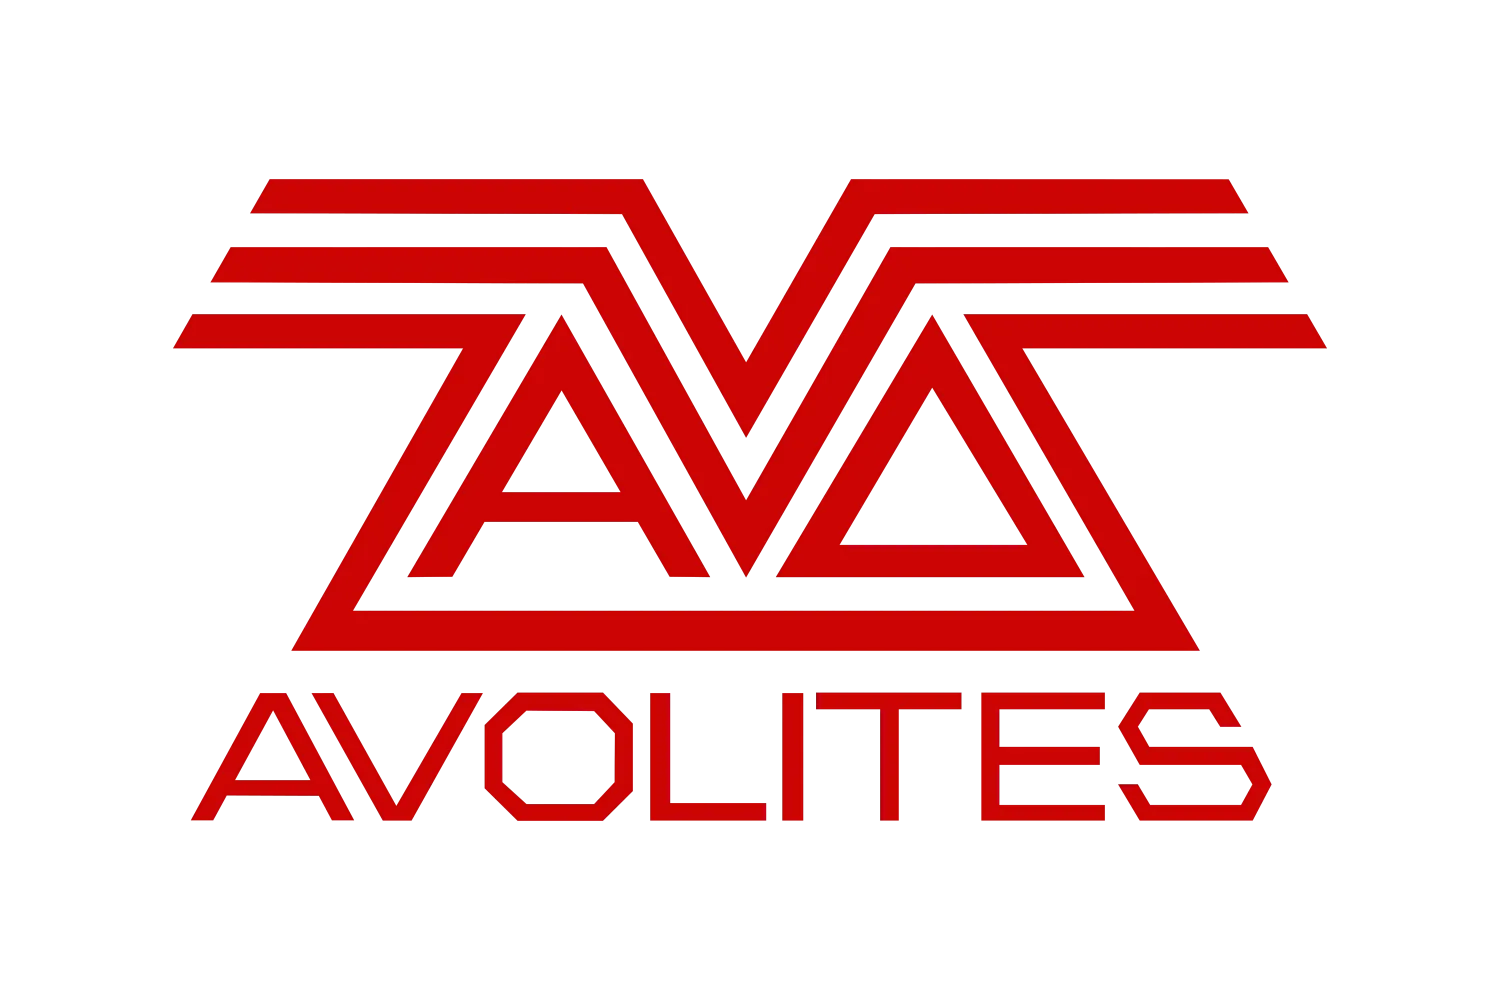 The image displays a logo with a stylized letter 'a' comprised of red lines, above which the name 'avolites', associated with event production, is written in capital red letters, all